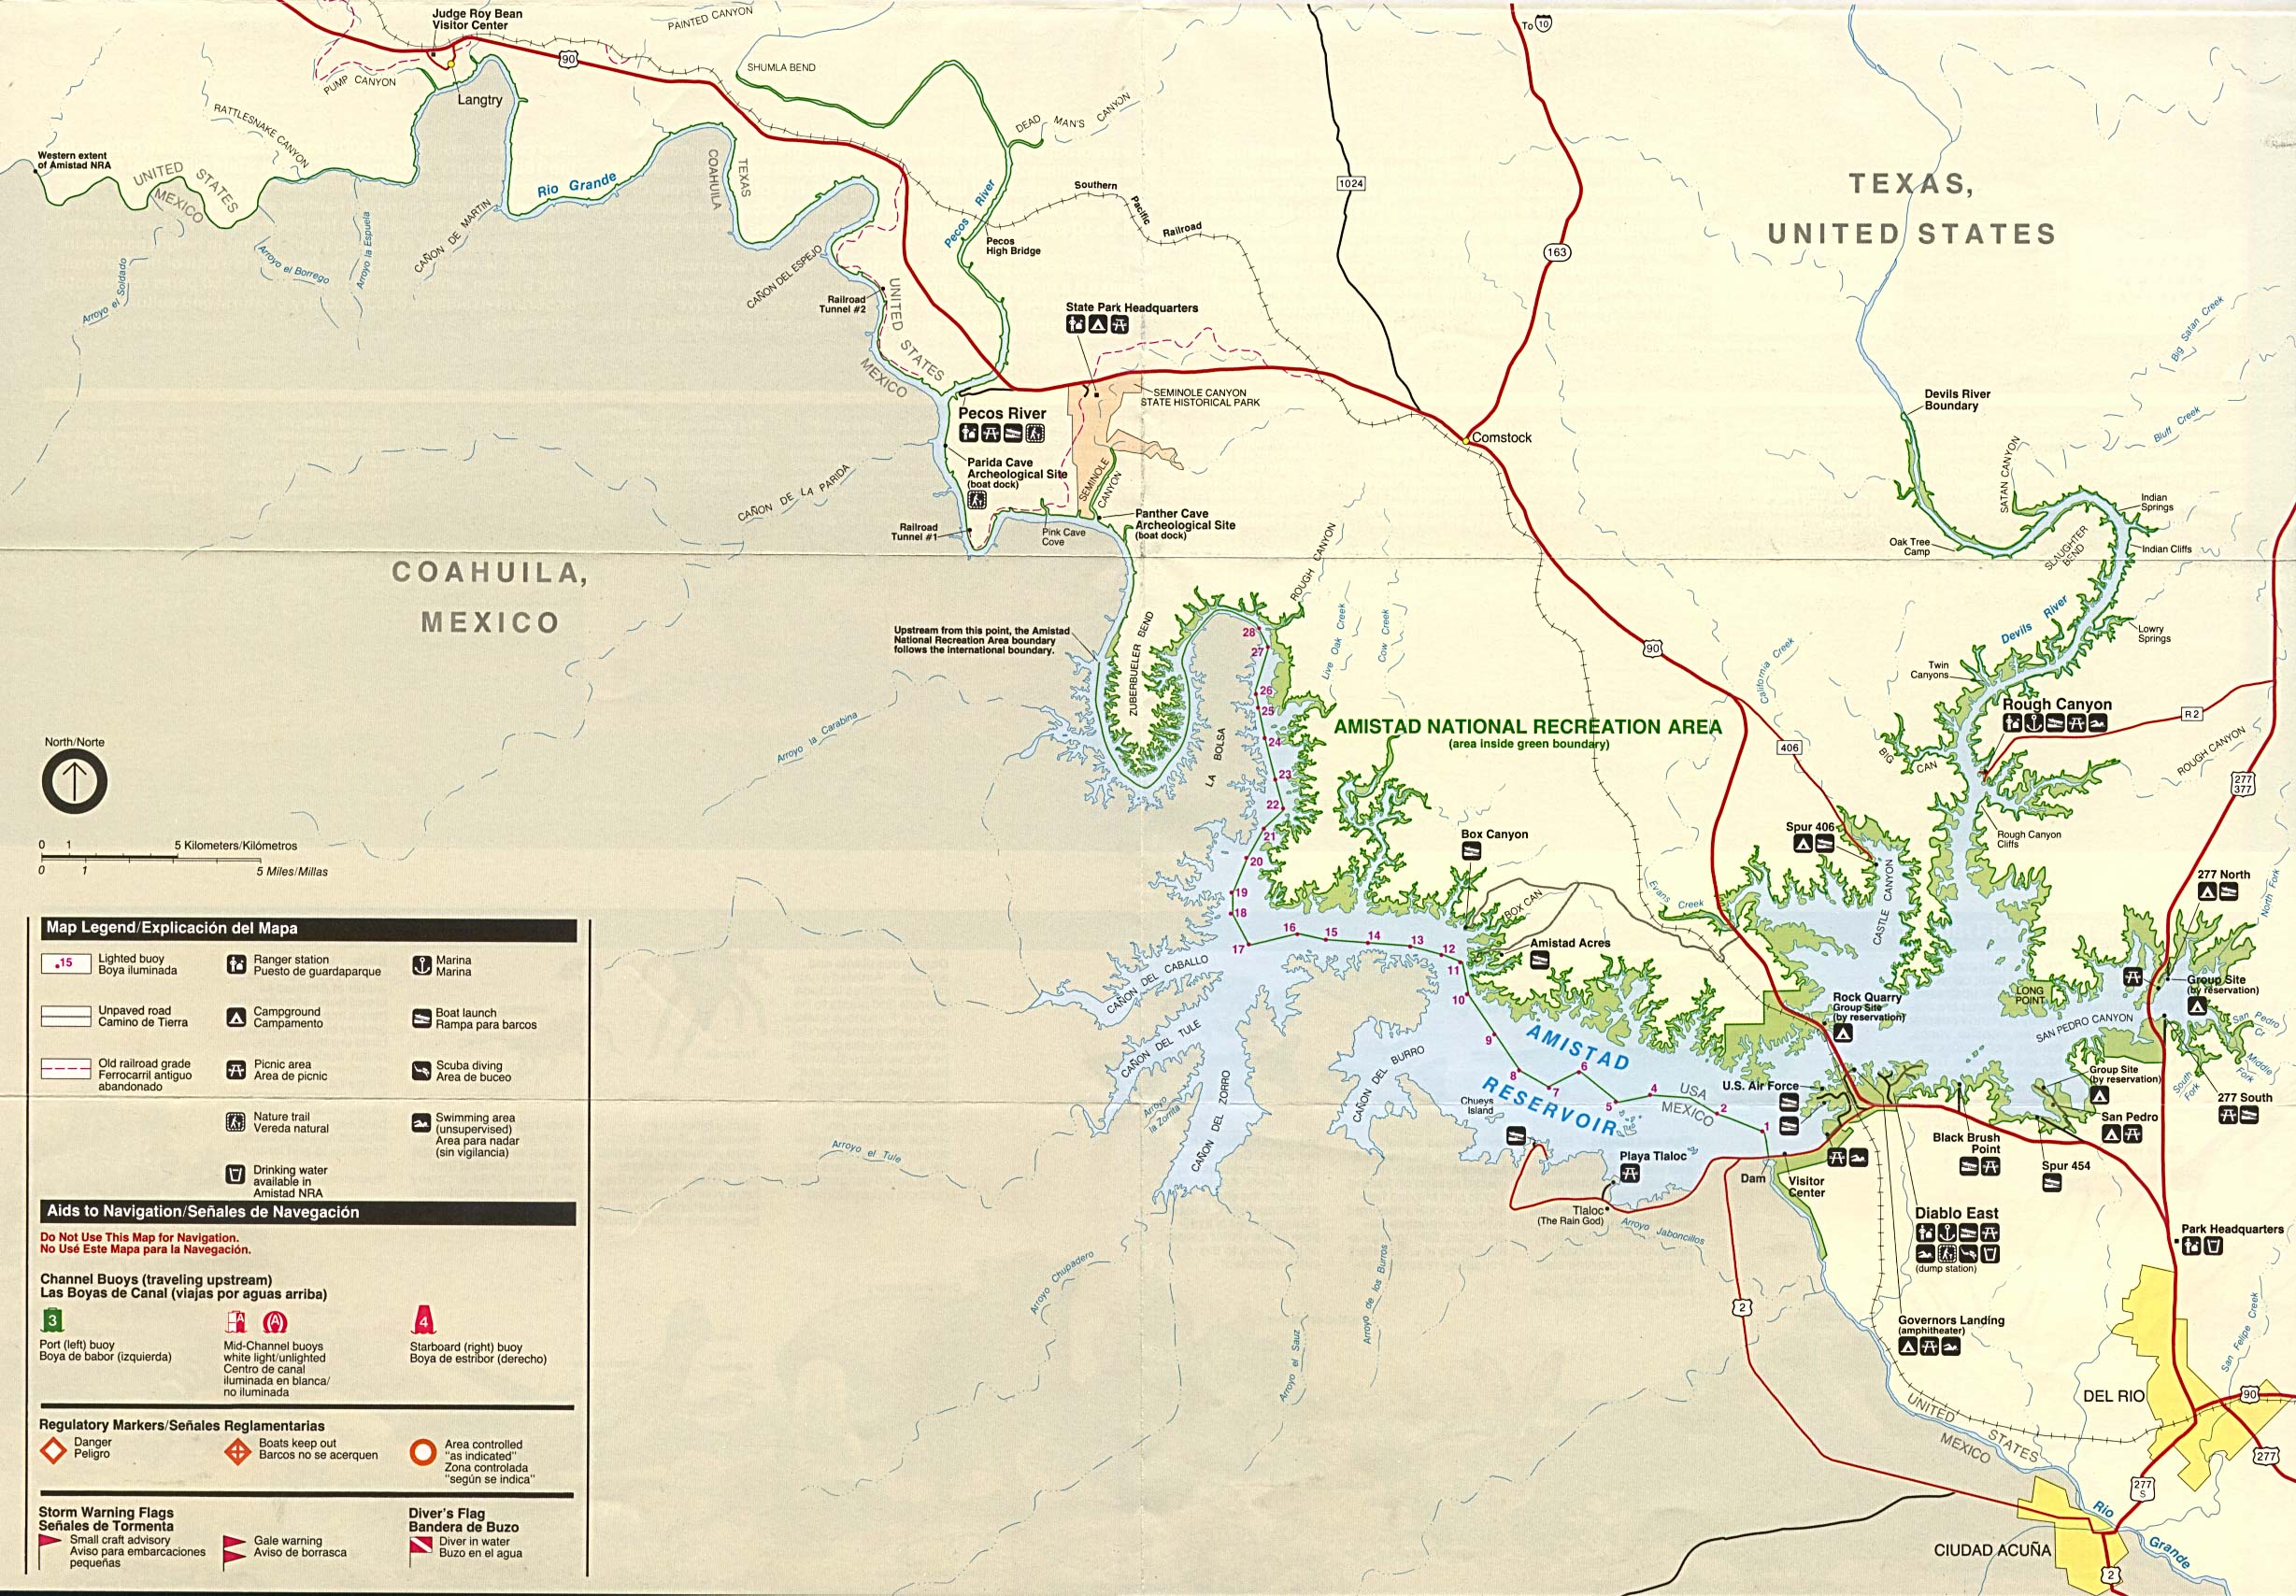  Maps of United States National Parks, Monuments and Historic Sites Amistad National Recreation Area [Texas] (Park Map) 1995 (673K) 